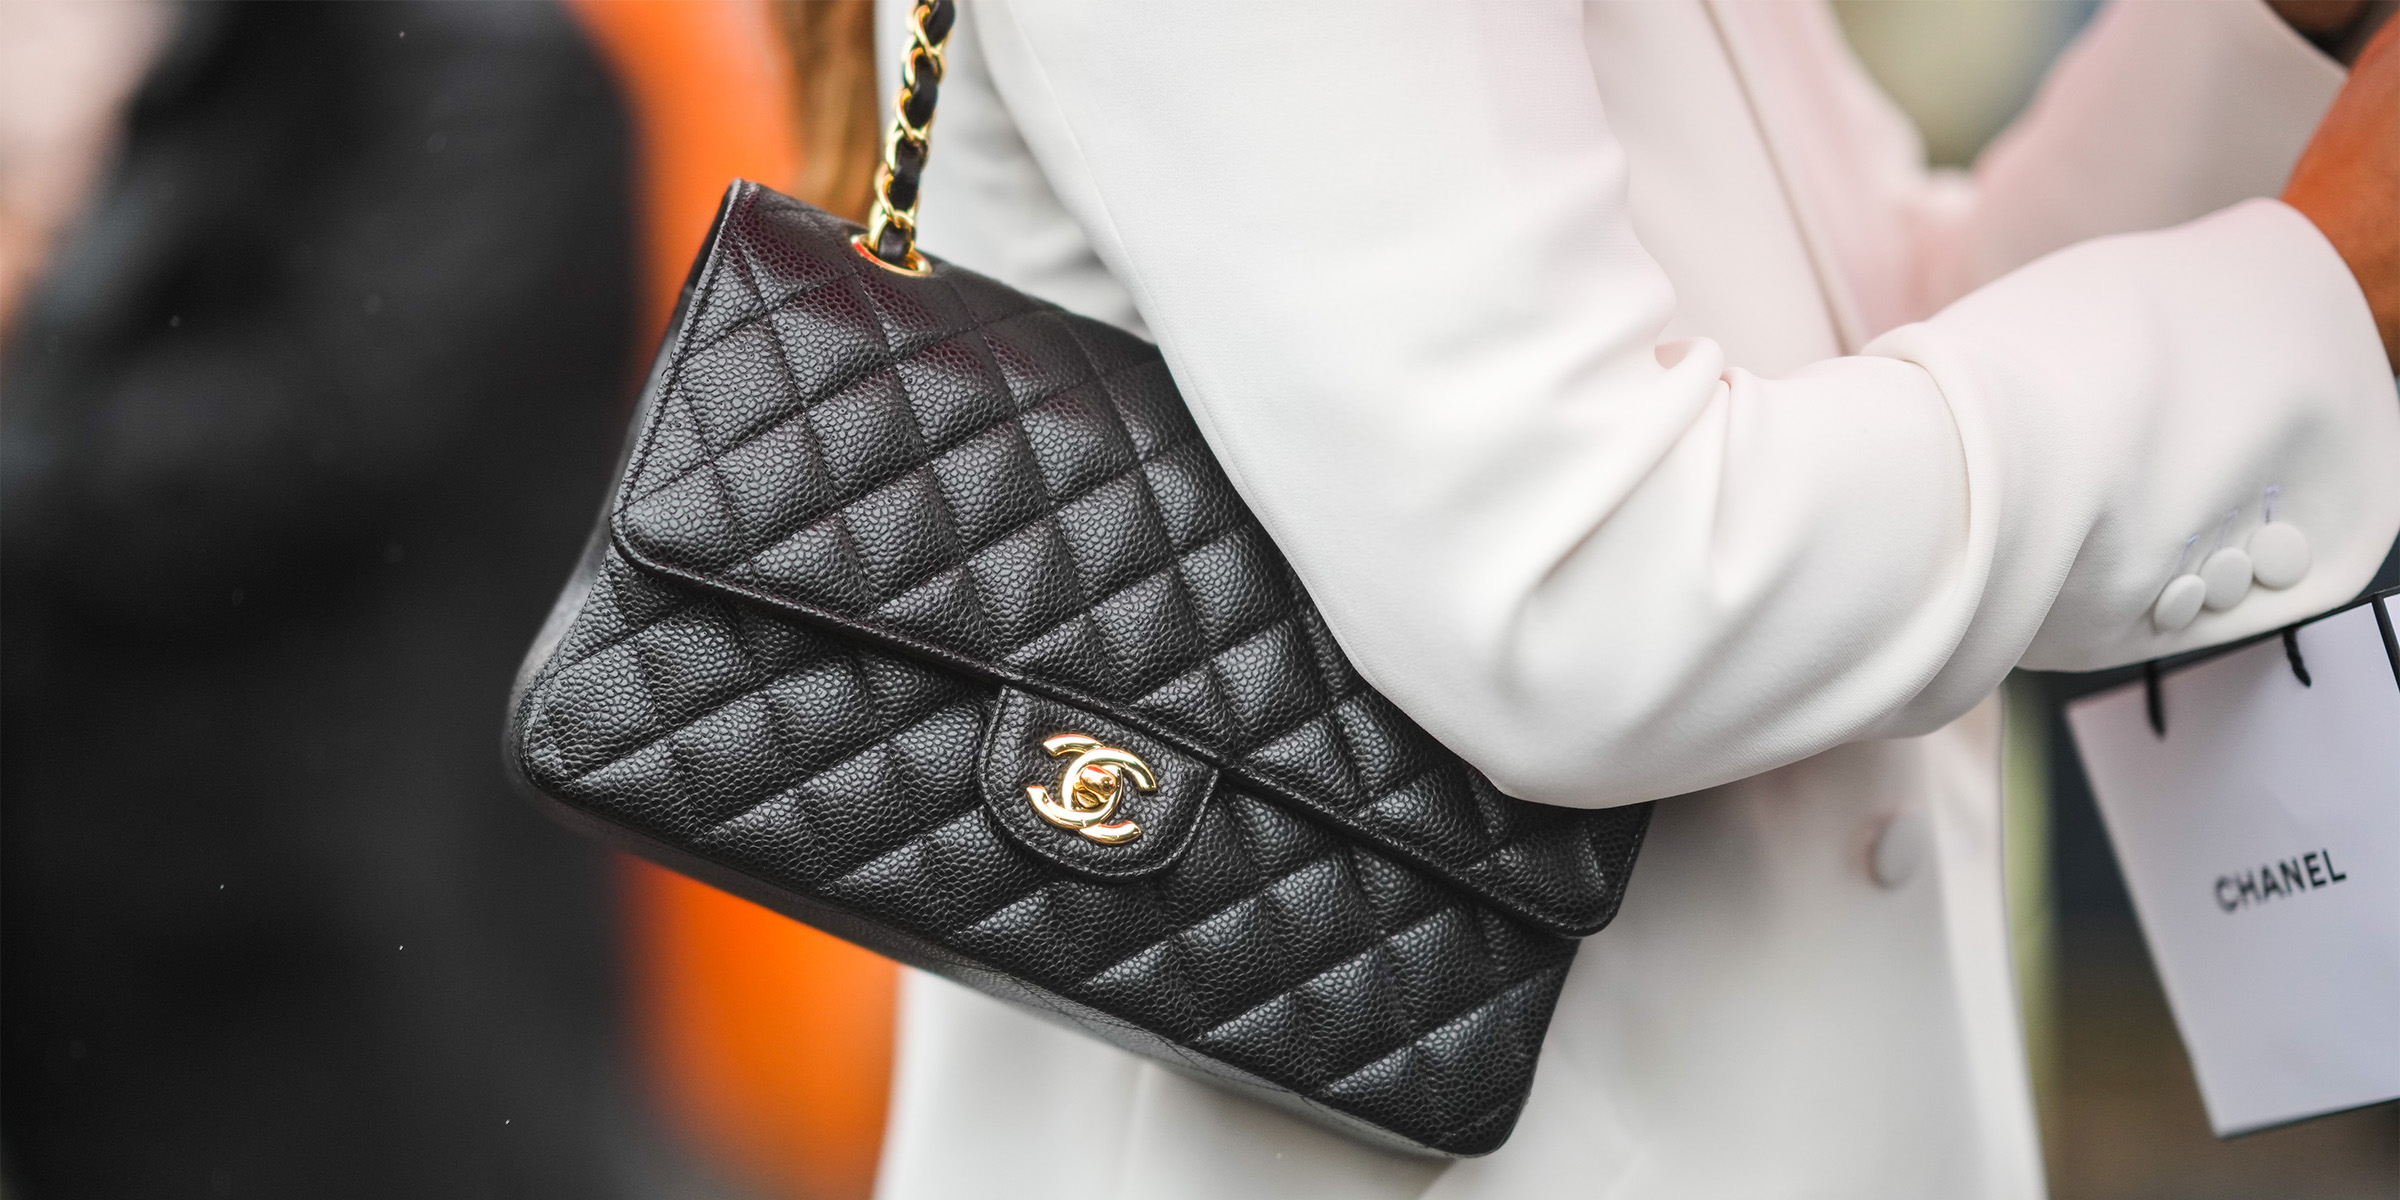 CHANEL GABRIELLE BAG TO BE DISCONTINUED? Breaking news!? 